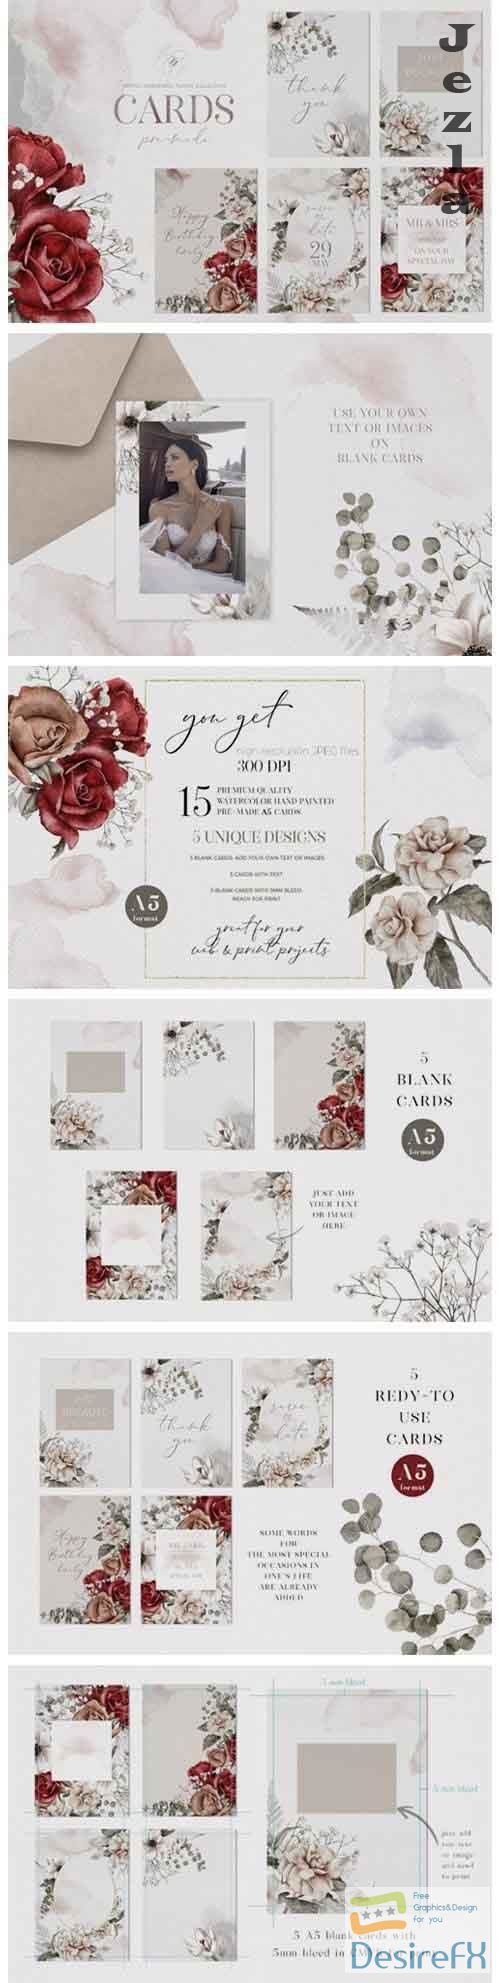 Watercolor Floral Pre-made Cards Wedding Valentine's Day - 1107526